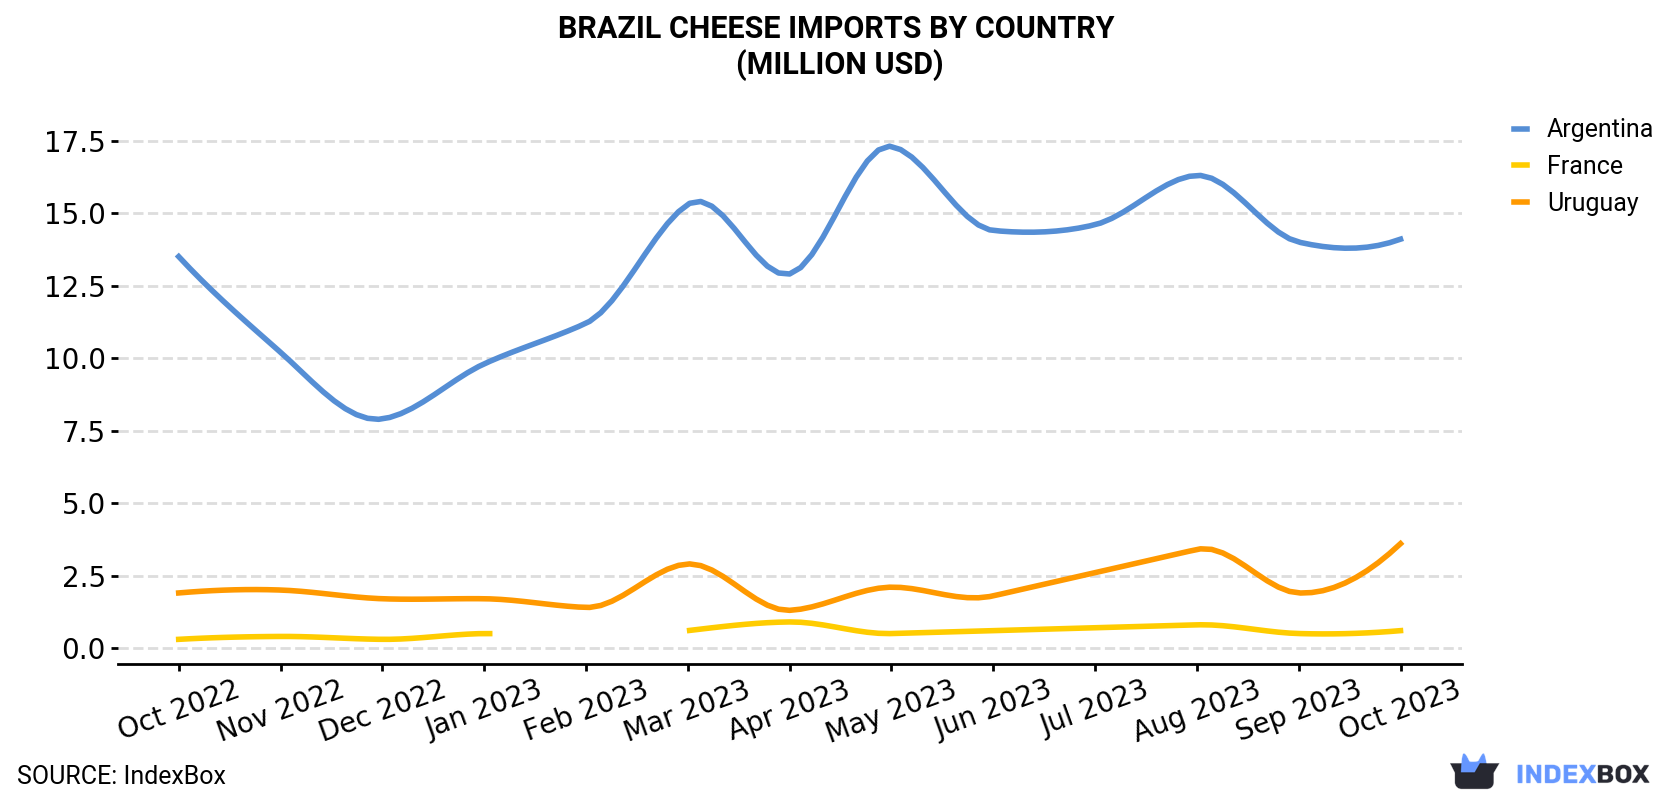 Brazil Cheese Imports By Country (Million USD)